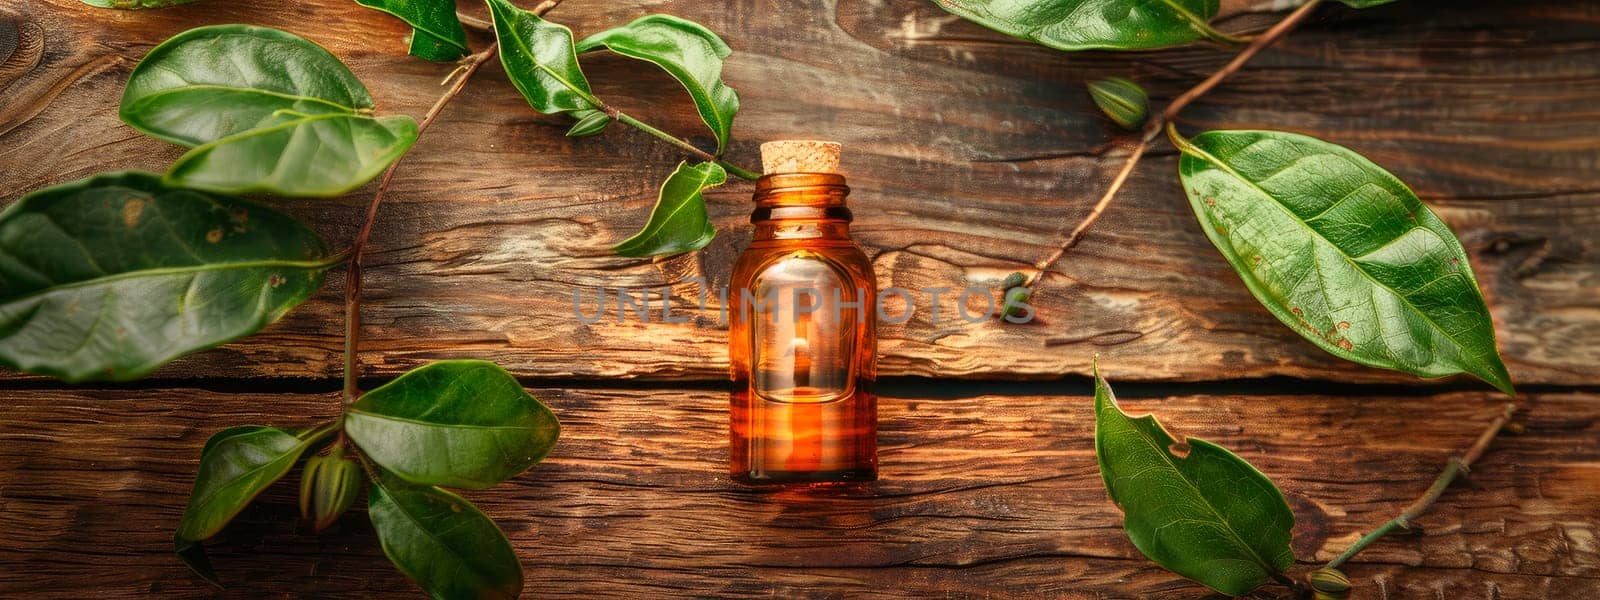 camphor essential oil in a bottle. Selective focus. by yanadjana